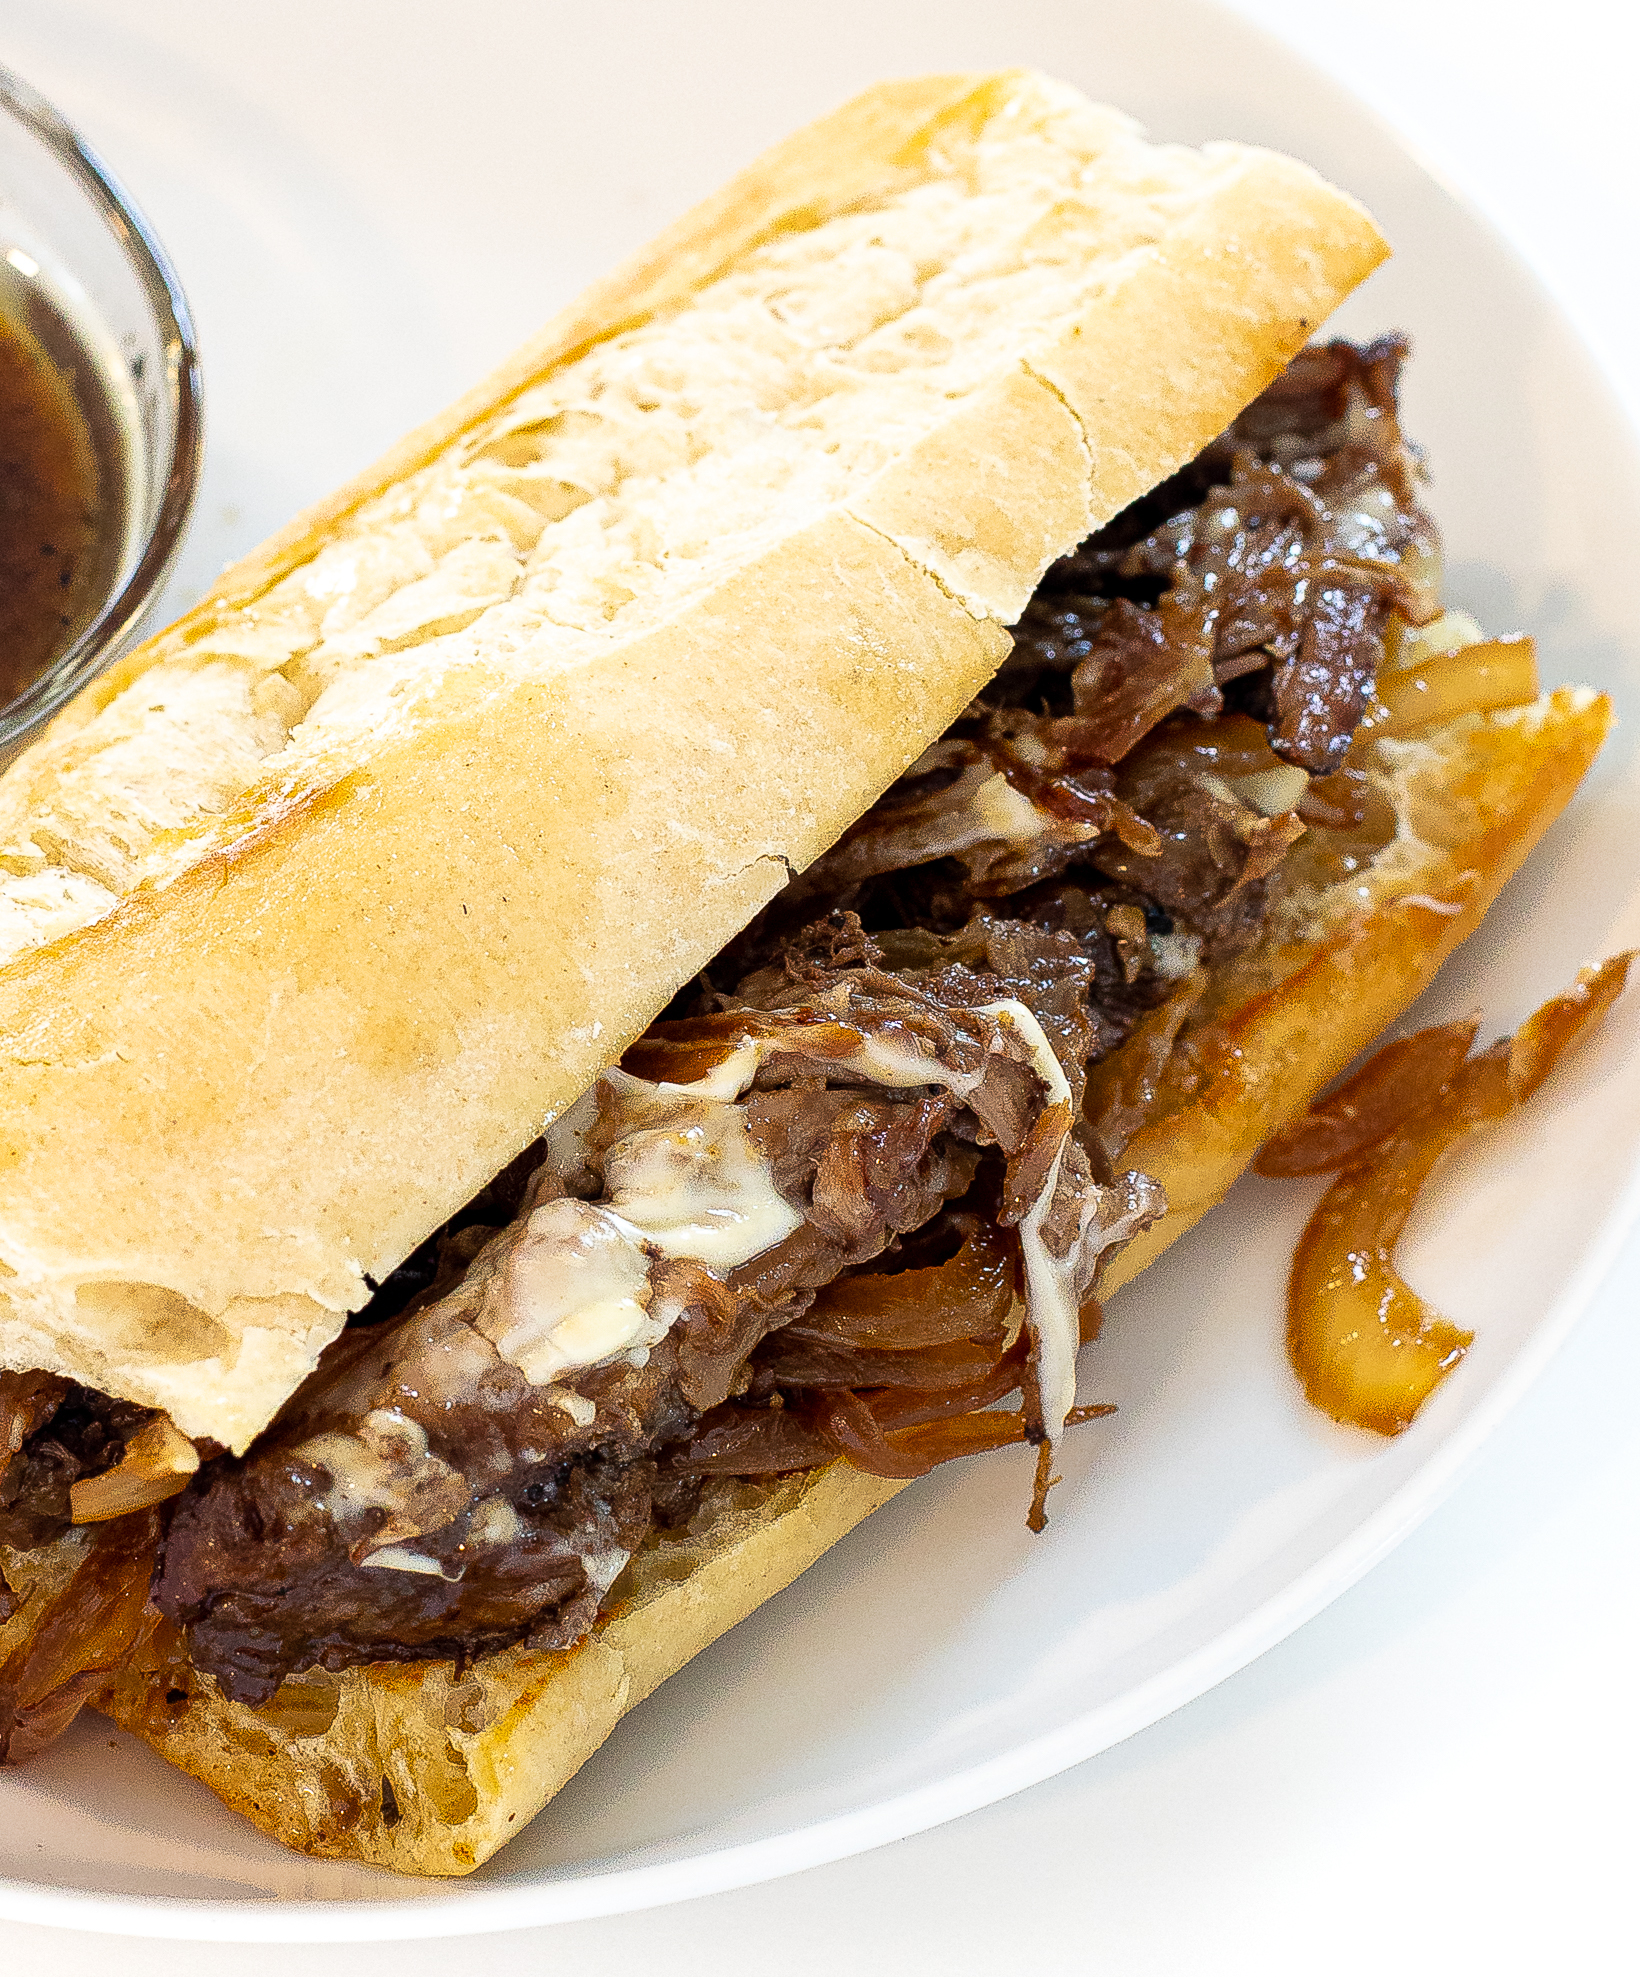 5-Ingredient Slow Cooker French Dip Sandwiches - So Good!